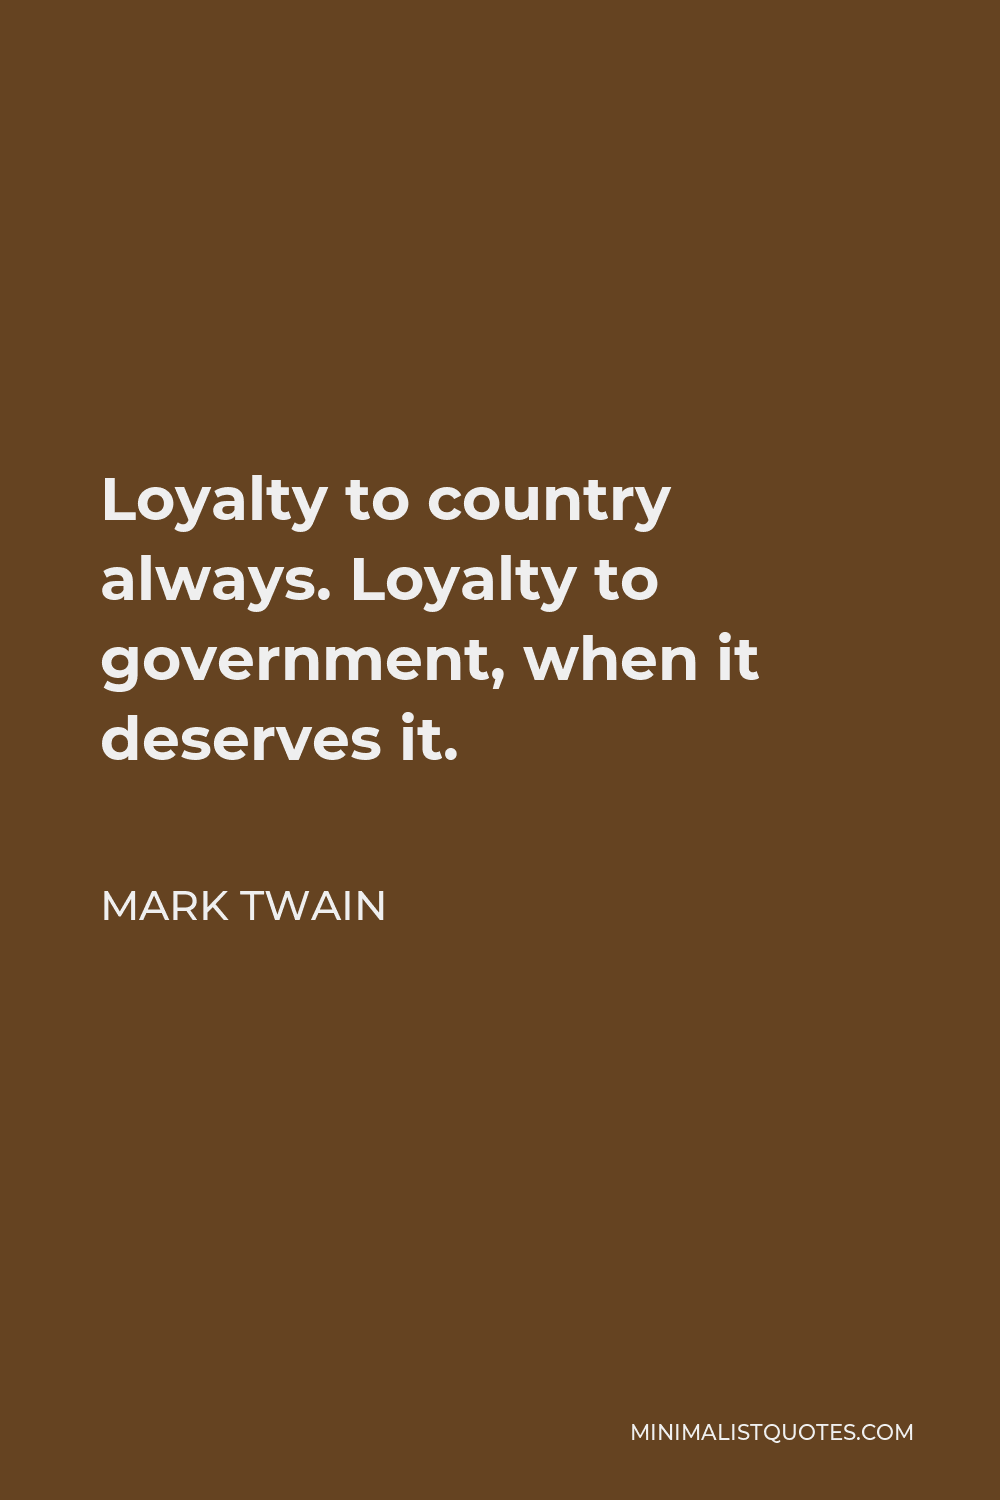 Mark Twain Quote - Loyalty to country always. Loyalty to government, when it deserves it.